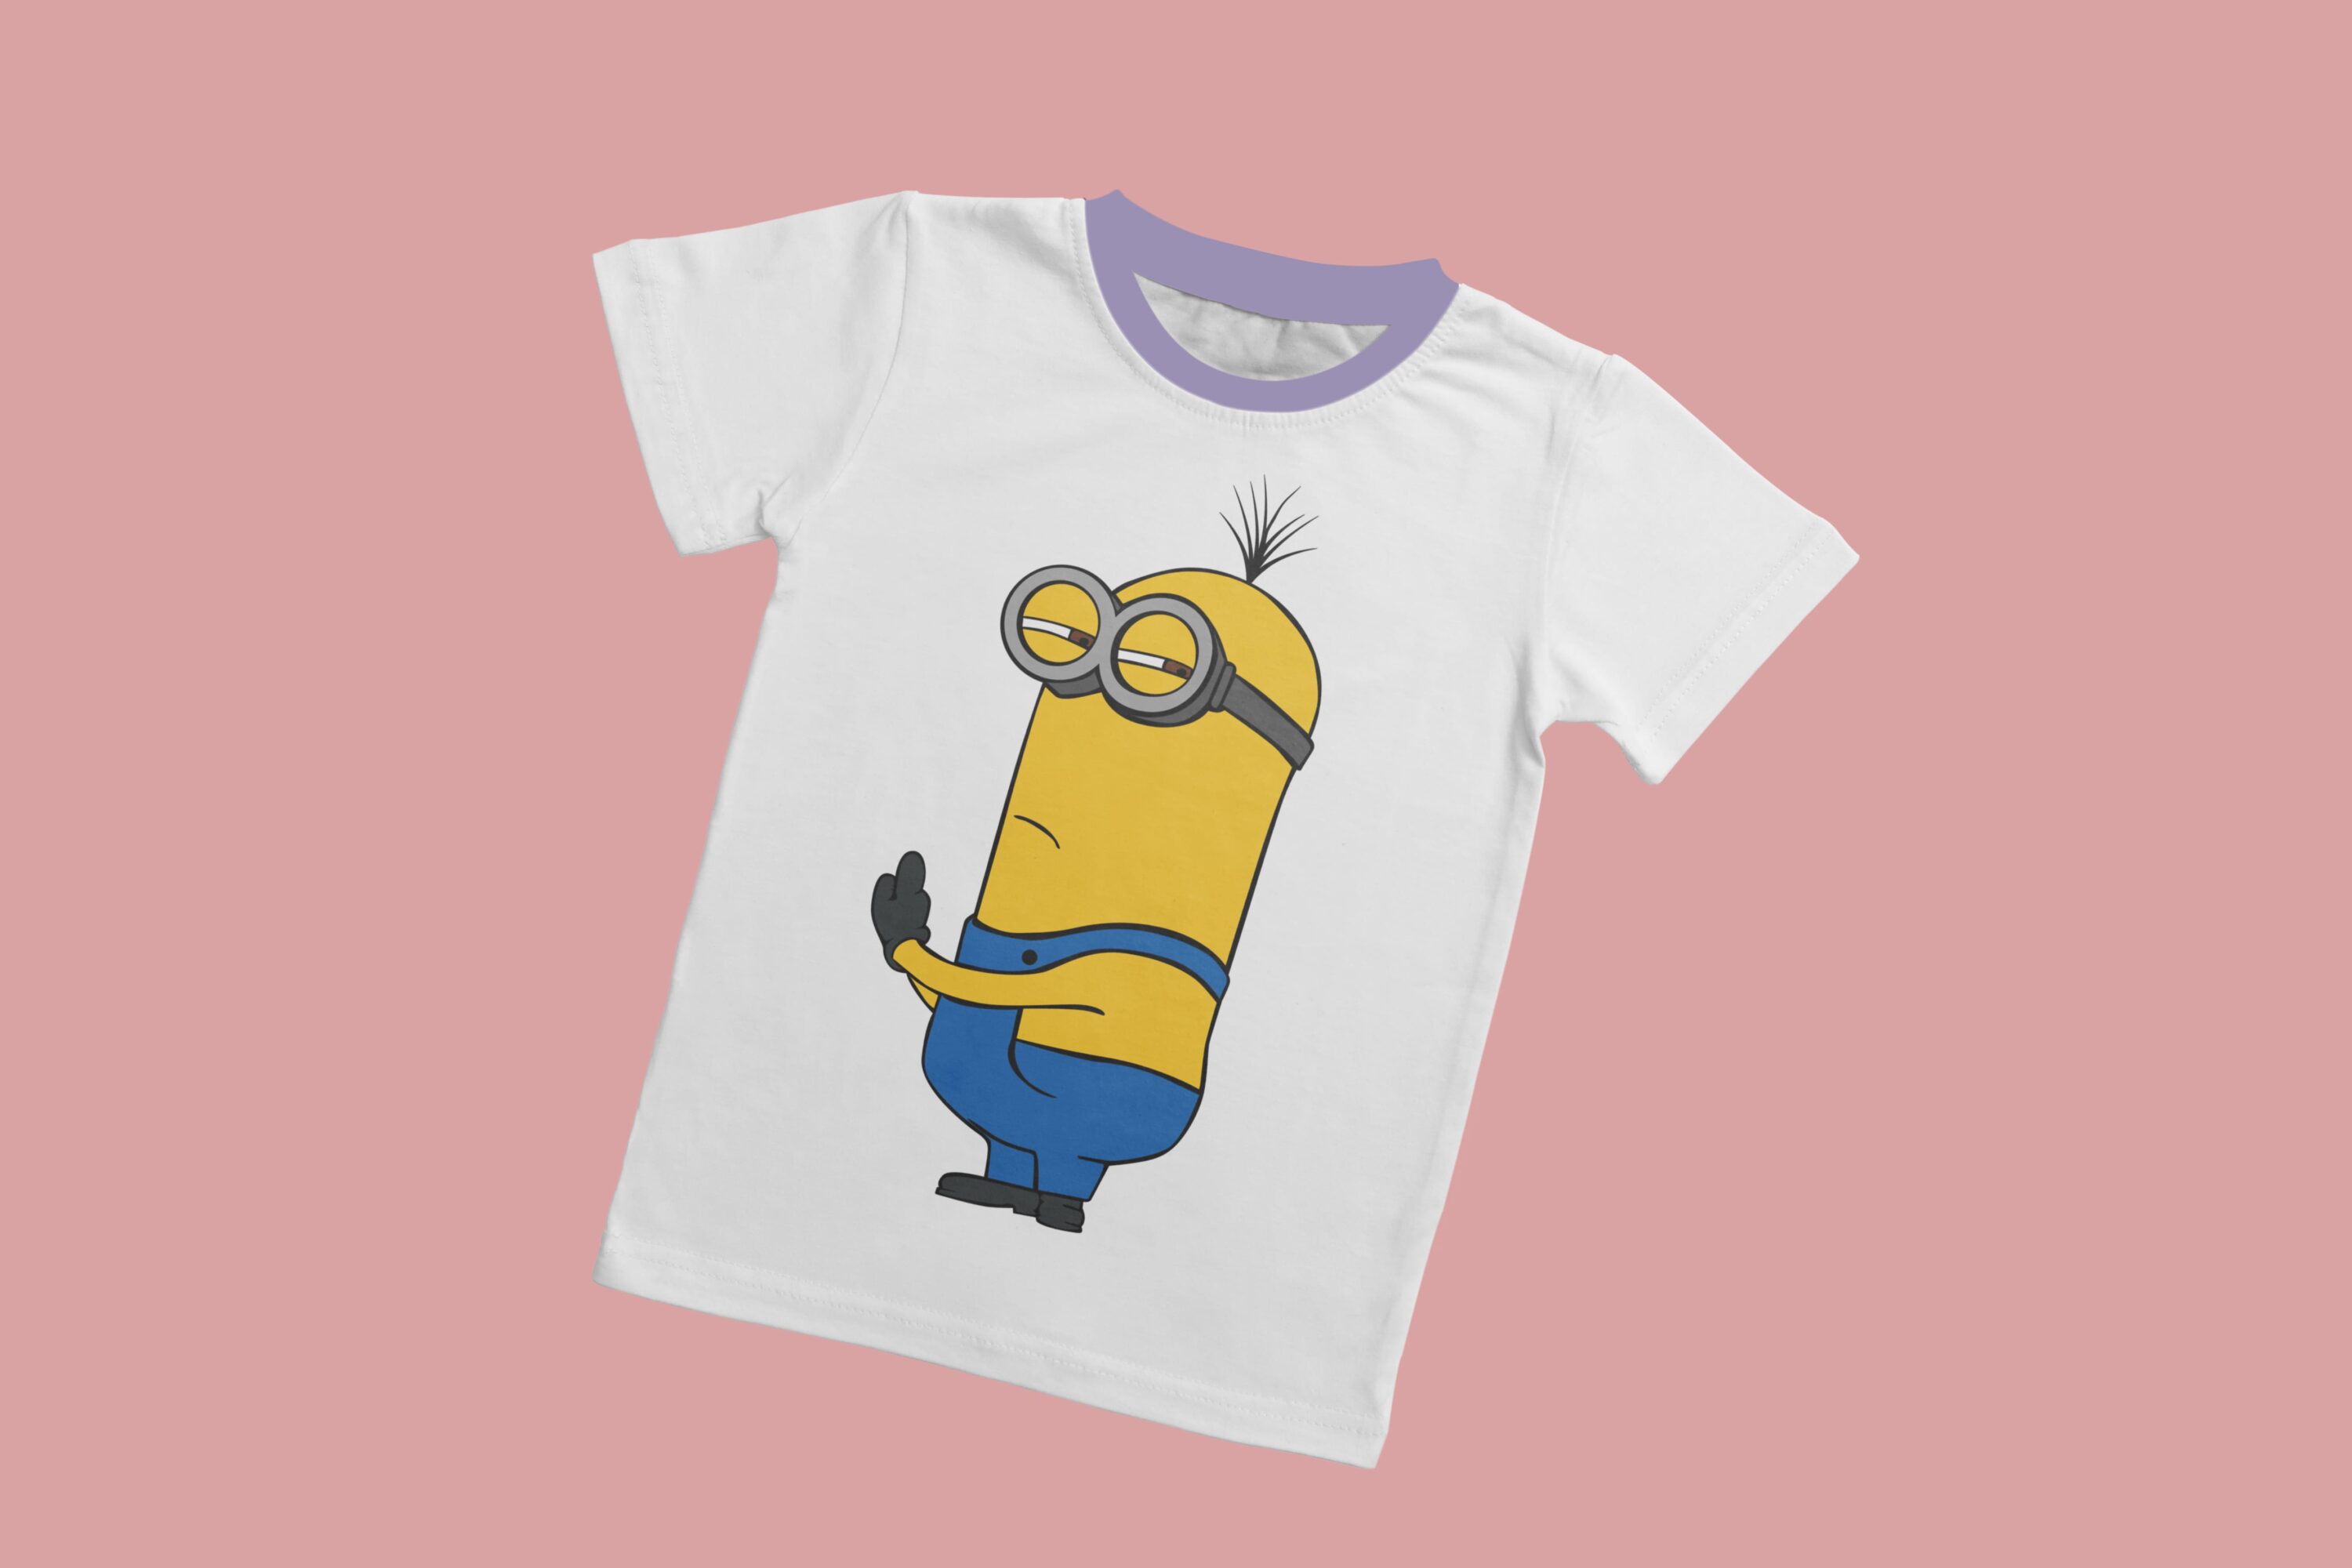 A white T-shirt with a lavender collar and a offended minion.